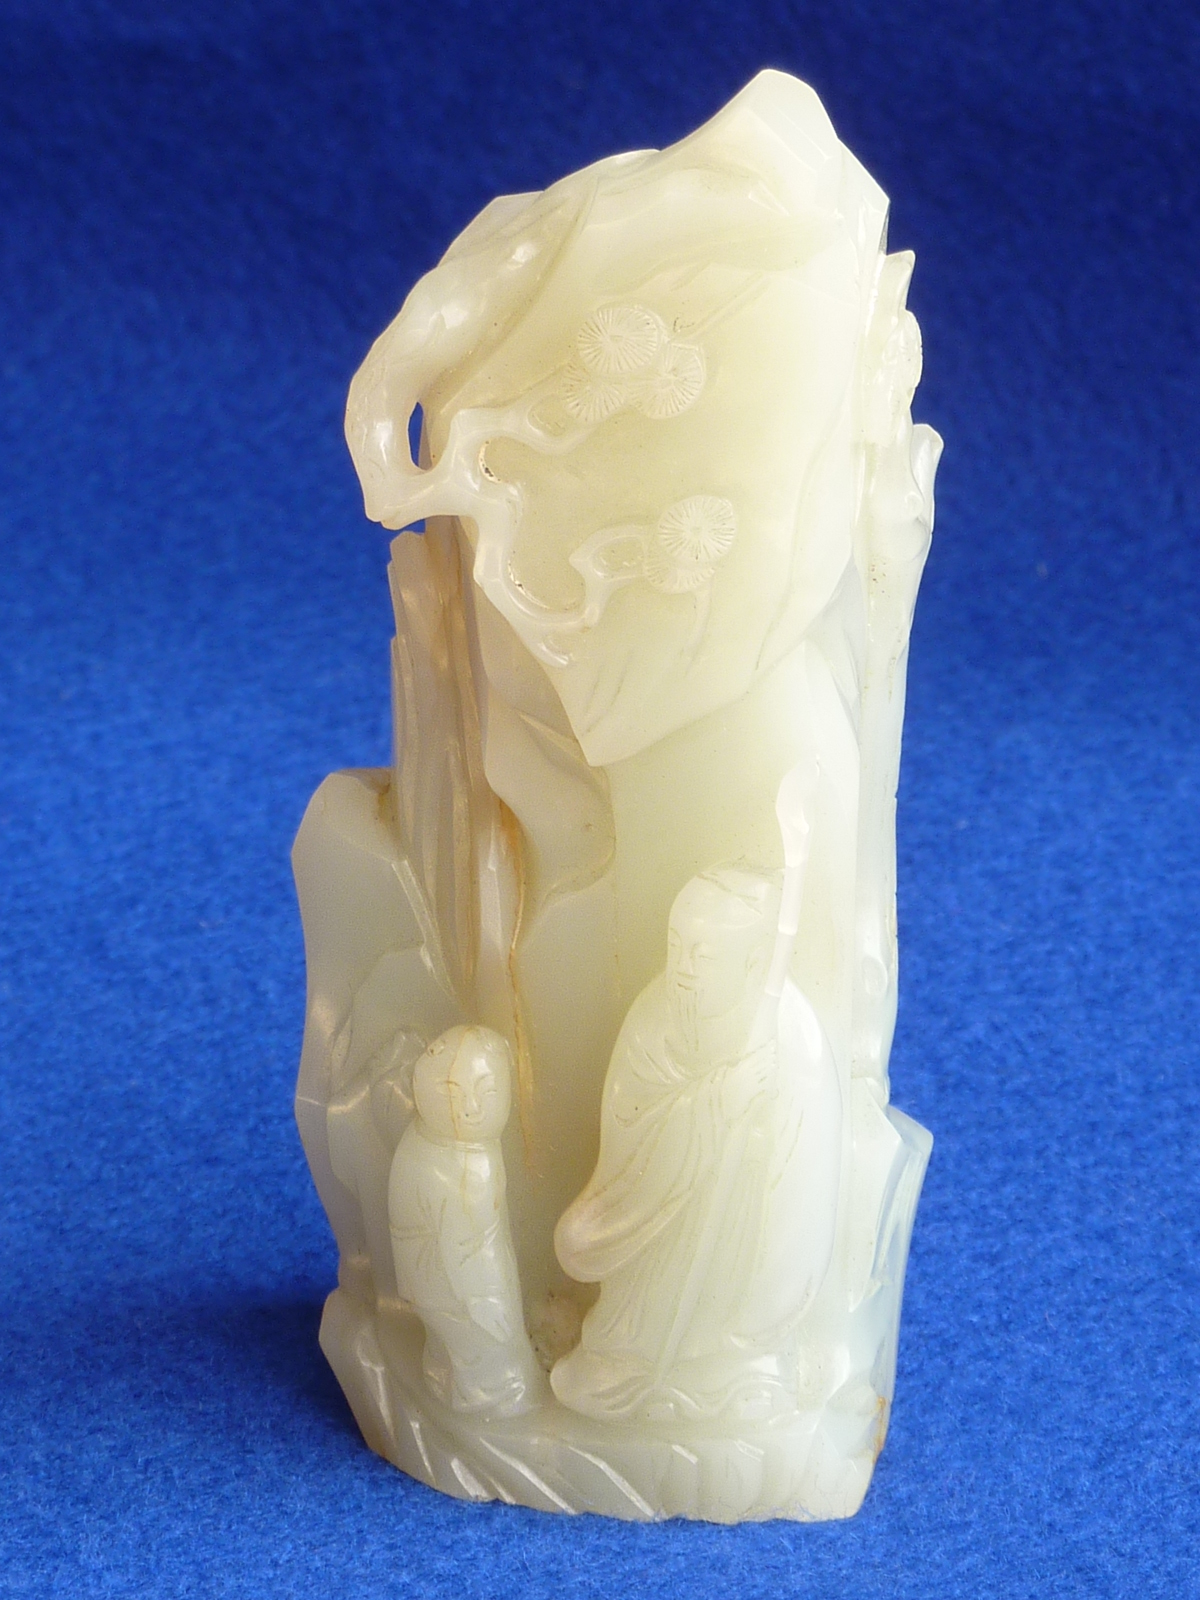 A rare and very finely carved 18th Century Chinese Jade boulder carving of small proportions, the